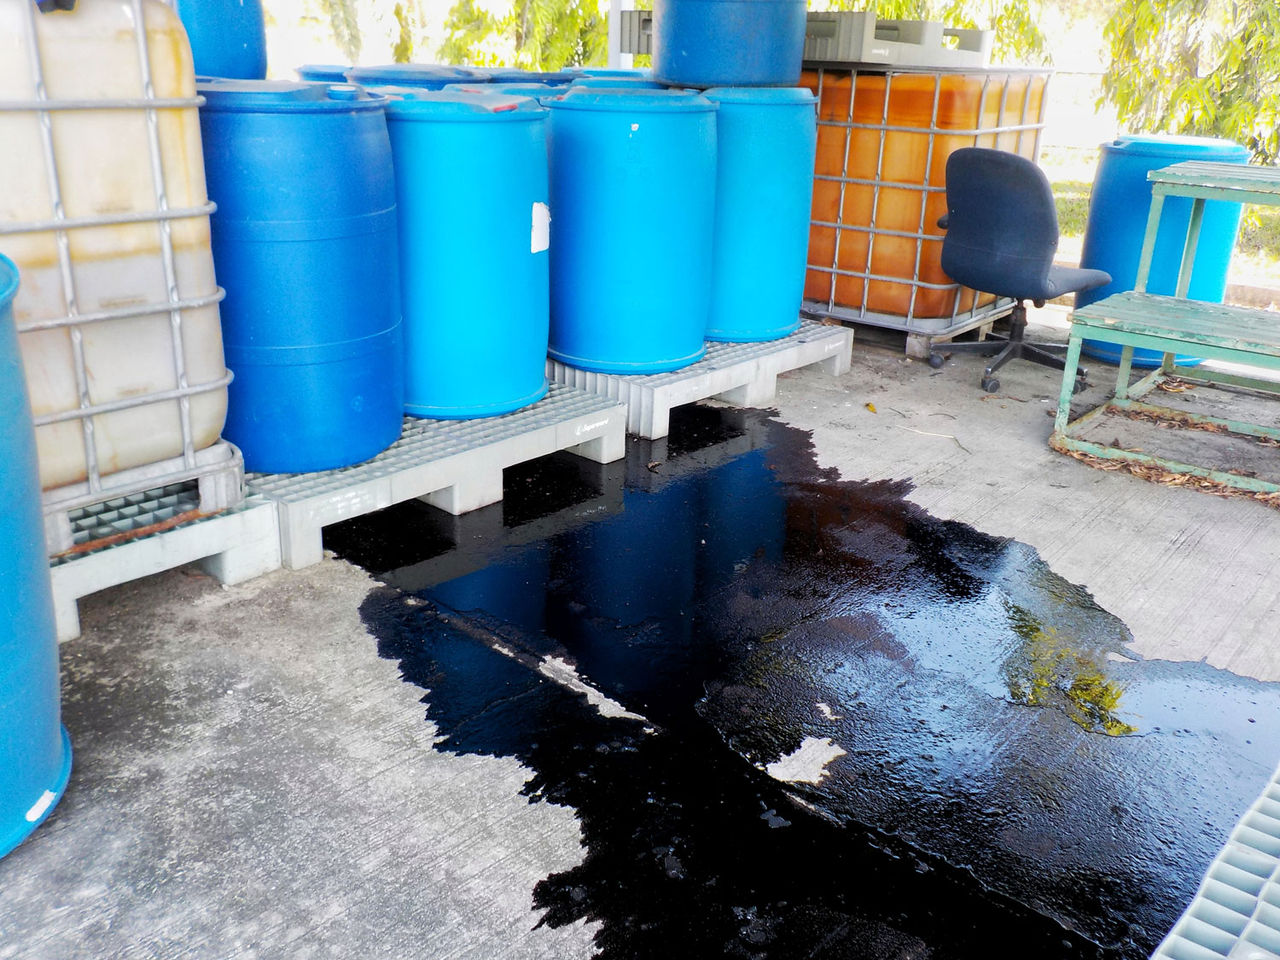 Black liquid chemicals leaking from the tank into the floor.